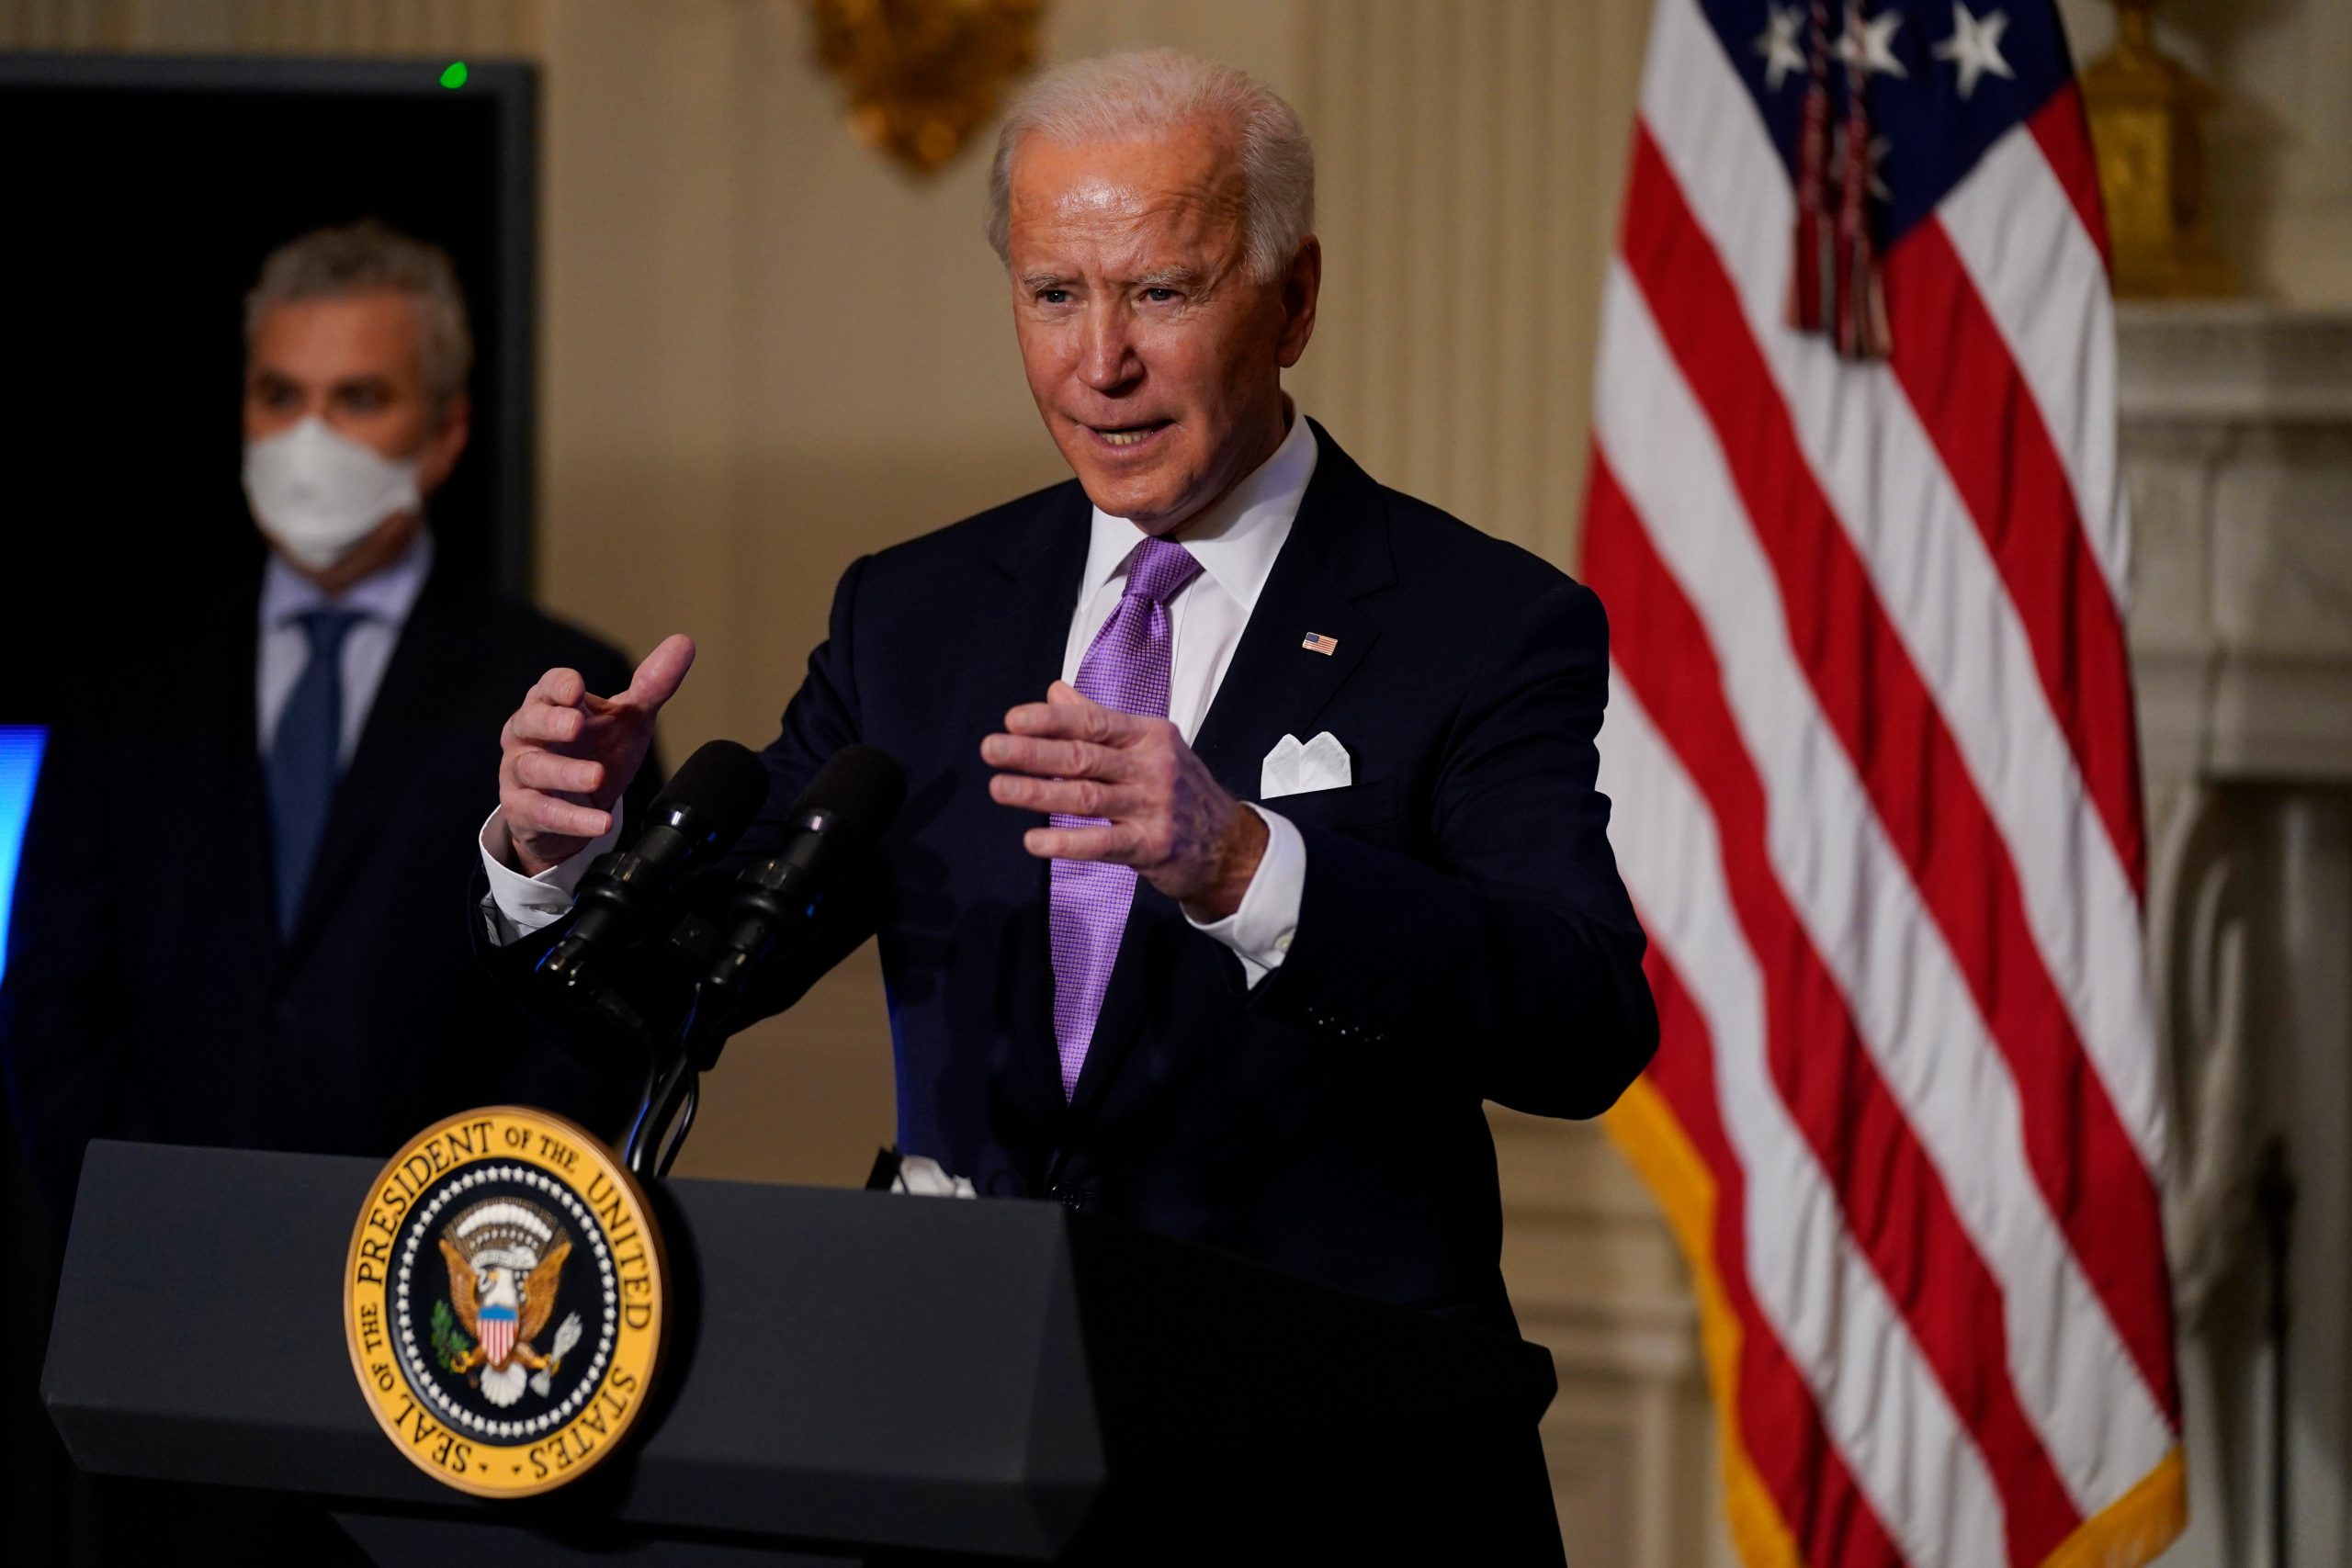 President Biden announces special task force on China, says ‘strong’ approach needed